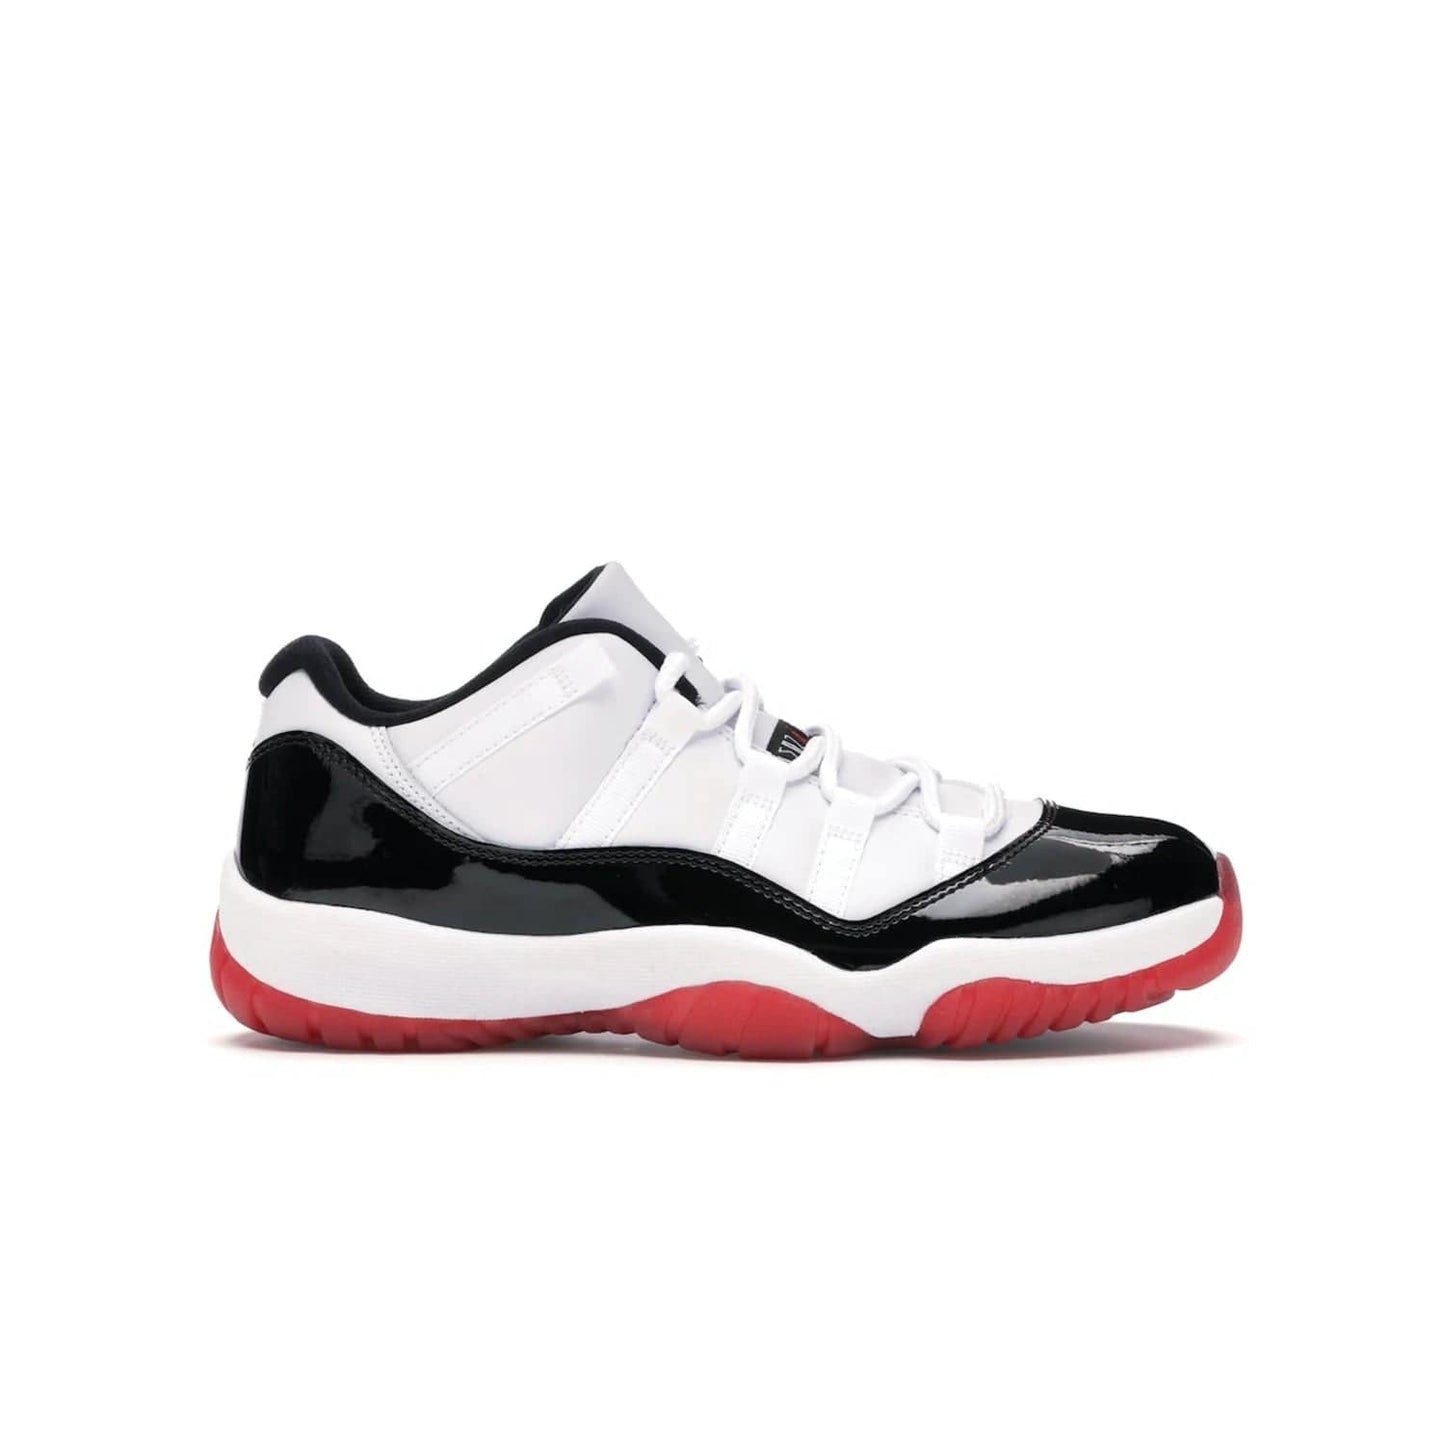 Jordan 11 Retro Low Concord Bred - Image 1 - Only at www.BallersClubKickz.com - Grab the classic Jordan 11 look with the Jordan 11 Retro Low Concord Bred. With white and black elements and the iconic red outsole of the Jordan 11 Bred, you won't miss a beat. Released in June 2020, the perfect complement to any outfit.